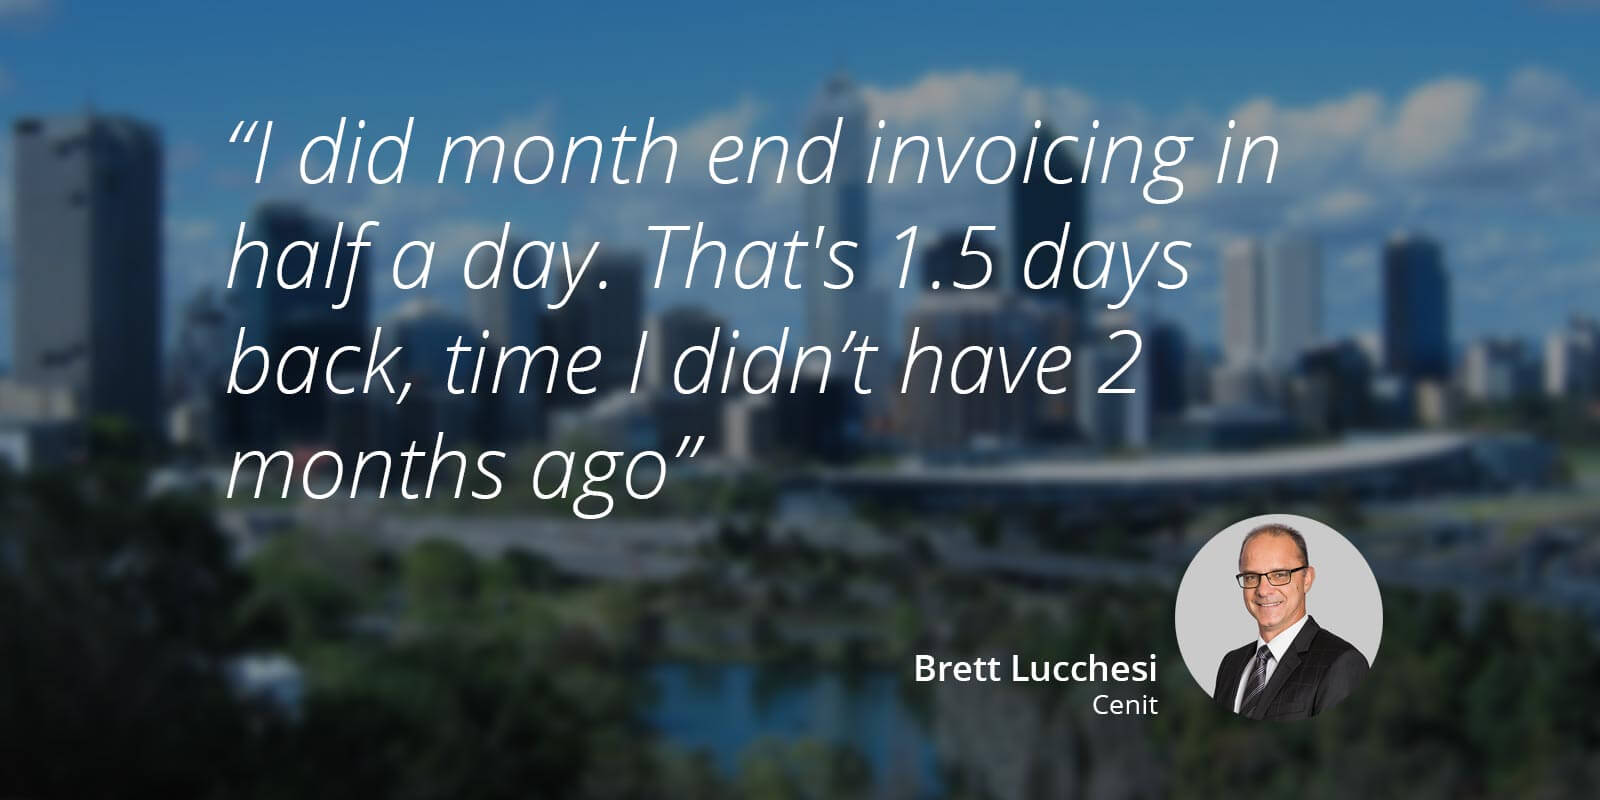 Interview with Brett Lucchesi, managing director of Cenit Structural Engineers.